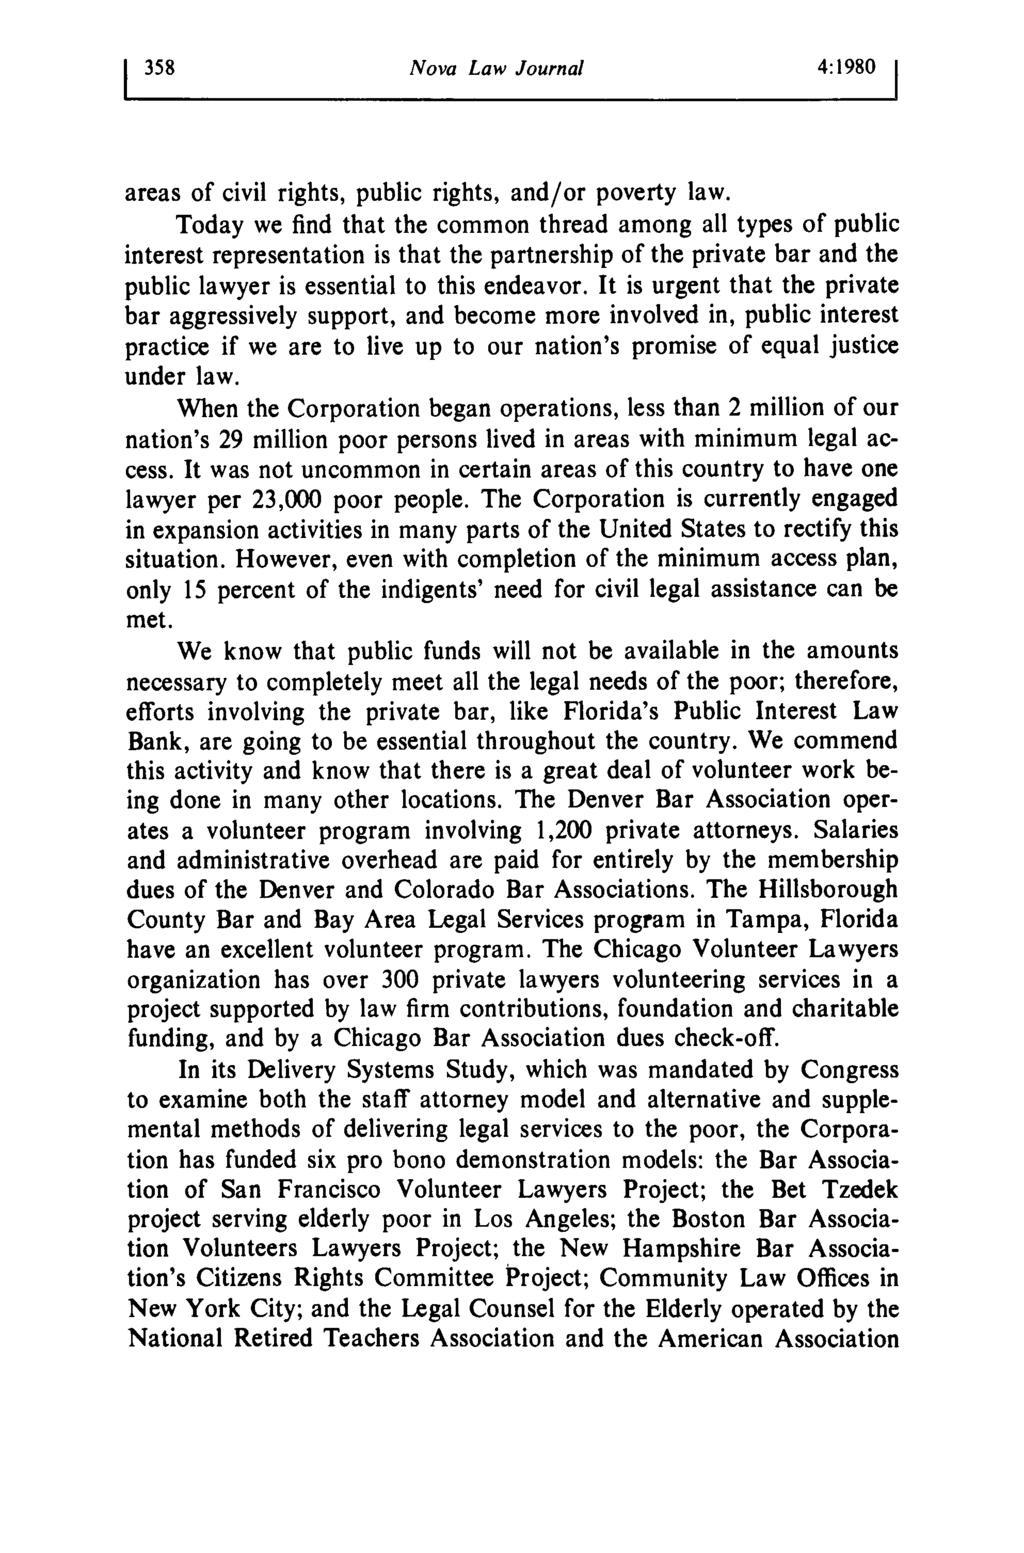 Nova Law Review, Vol. 4, Iss. 2 [1980], Art. 5 1358 Nova Law Journal 4:980 1 areas of civil rights, public rights, and/or poverty law.